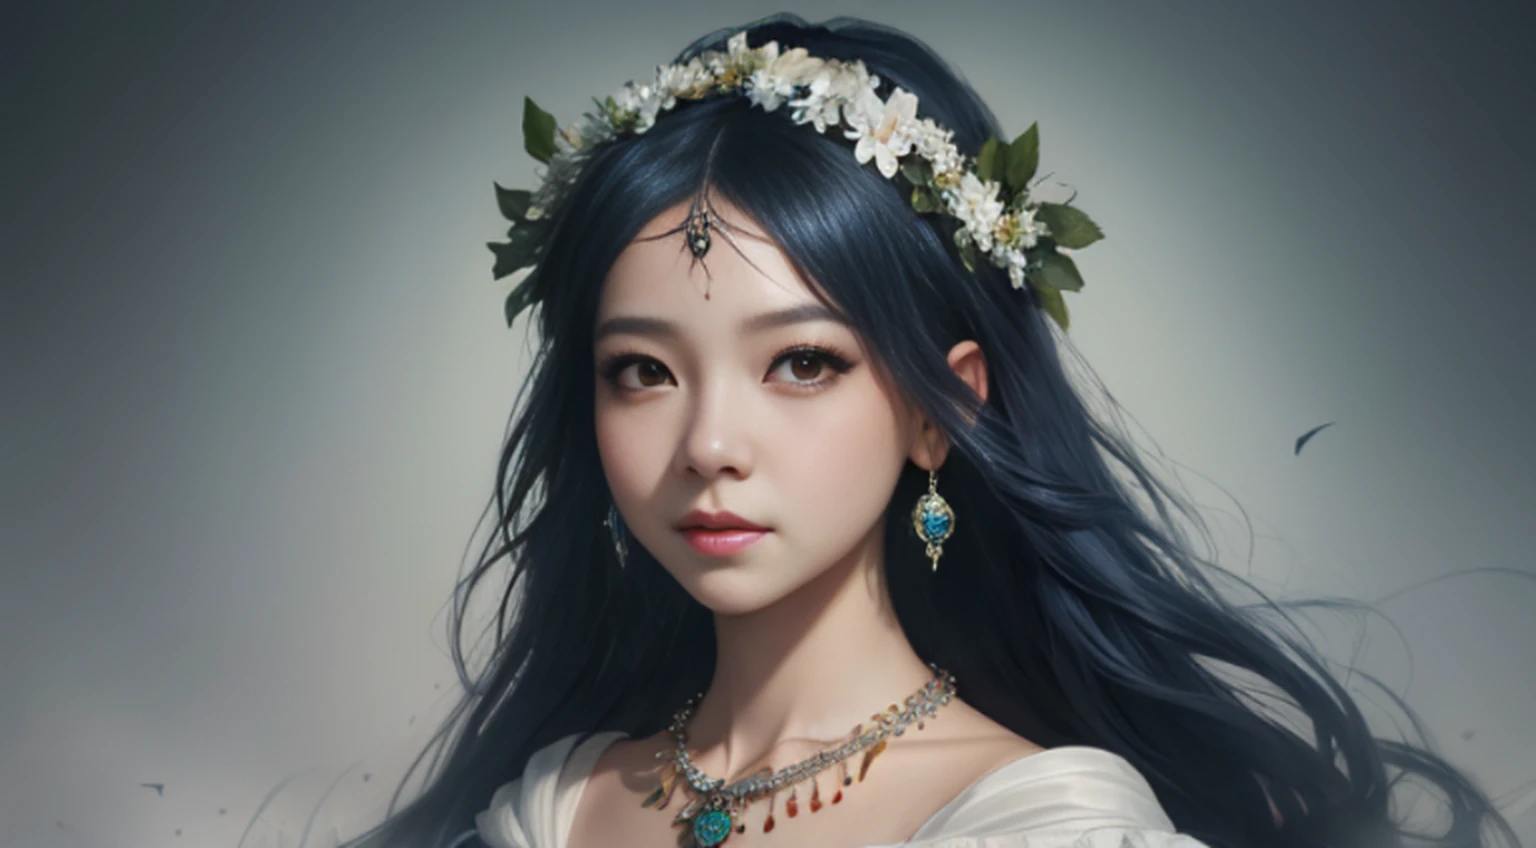 A woman with a wreath on her head and a beautiful necklace, Image of a full-length woman and clothes from the Middle Ages, retrato bonito da fantasia, retrato bonito da arte da fantasia, retrato da fantasia, retrato da arte da fantasia, donzela da fantasia bonita, retrato bonito, Fantasy genre portrait, arte do retrato da fantasia, wlop intrincado, arte digital bonita, arte da fantasia bonita, donzela bonita, retrato do romantismo, ross tran 8 k, retrato muito bonito, imagem de retrato bonito